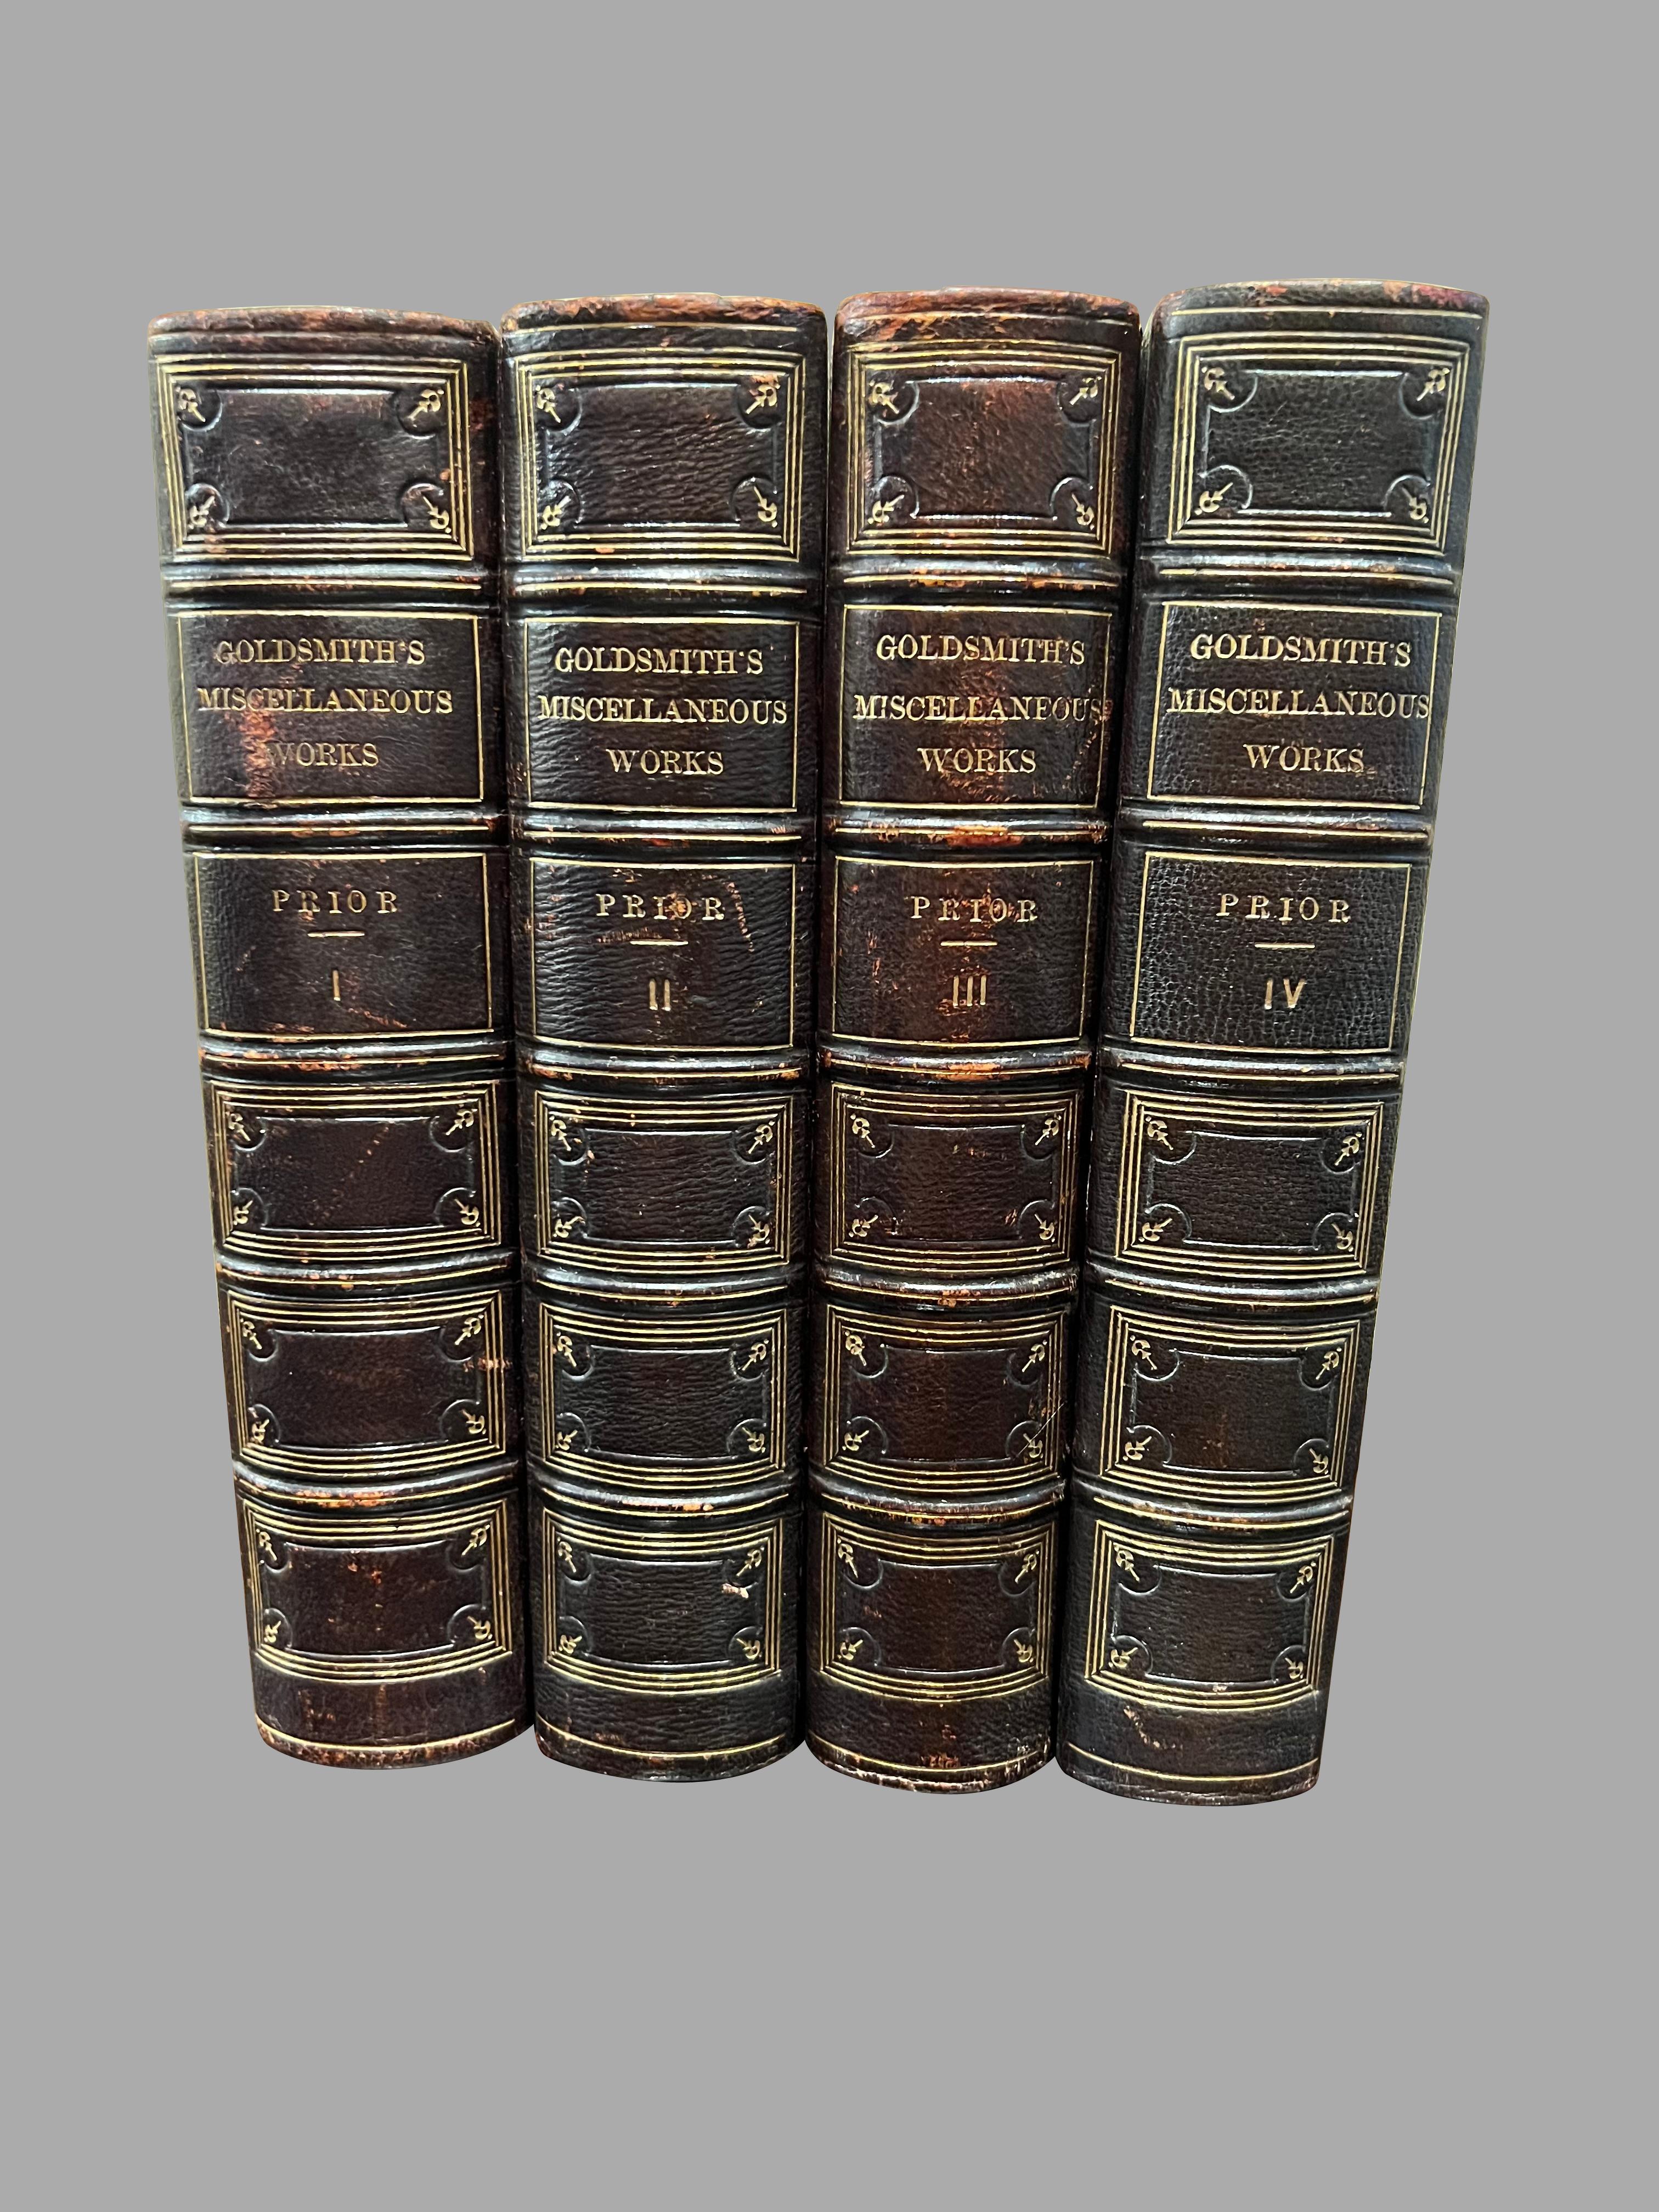 The Miscellaneous Works of Oliver Goldsmith (1728-1774)  in 4 gilt tooled leatherbound volumes. Published: New York G.P. Putnam & Company, 10 Park Place, 1854. A nice set of selected writings by this famous Anglo-Irish playwright and novelist in